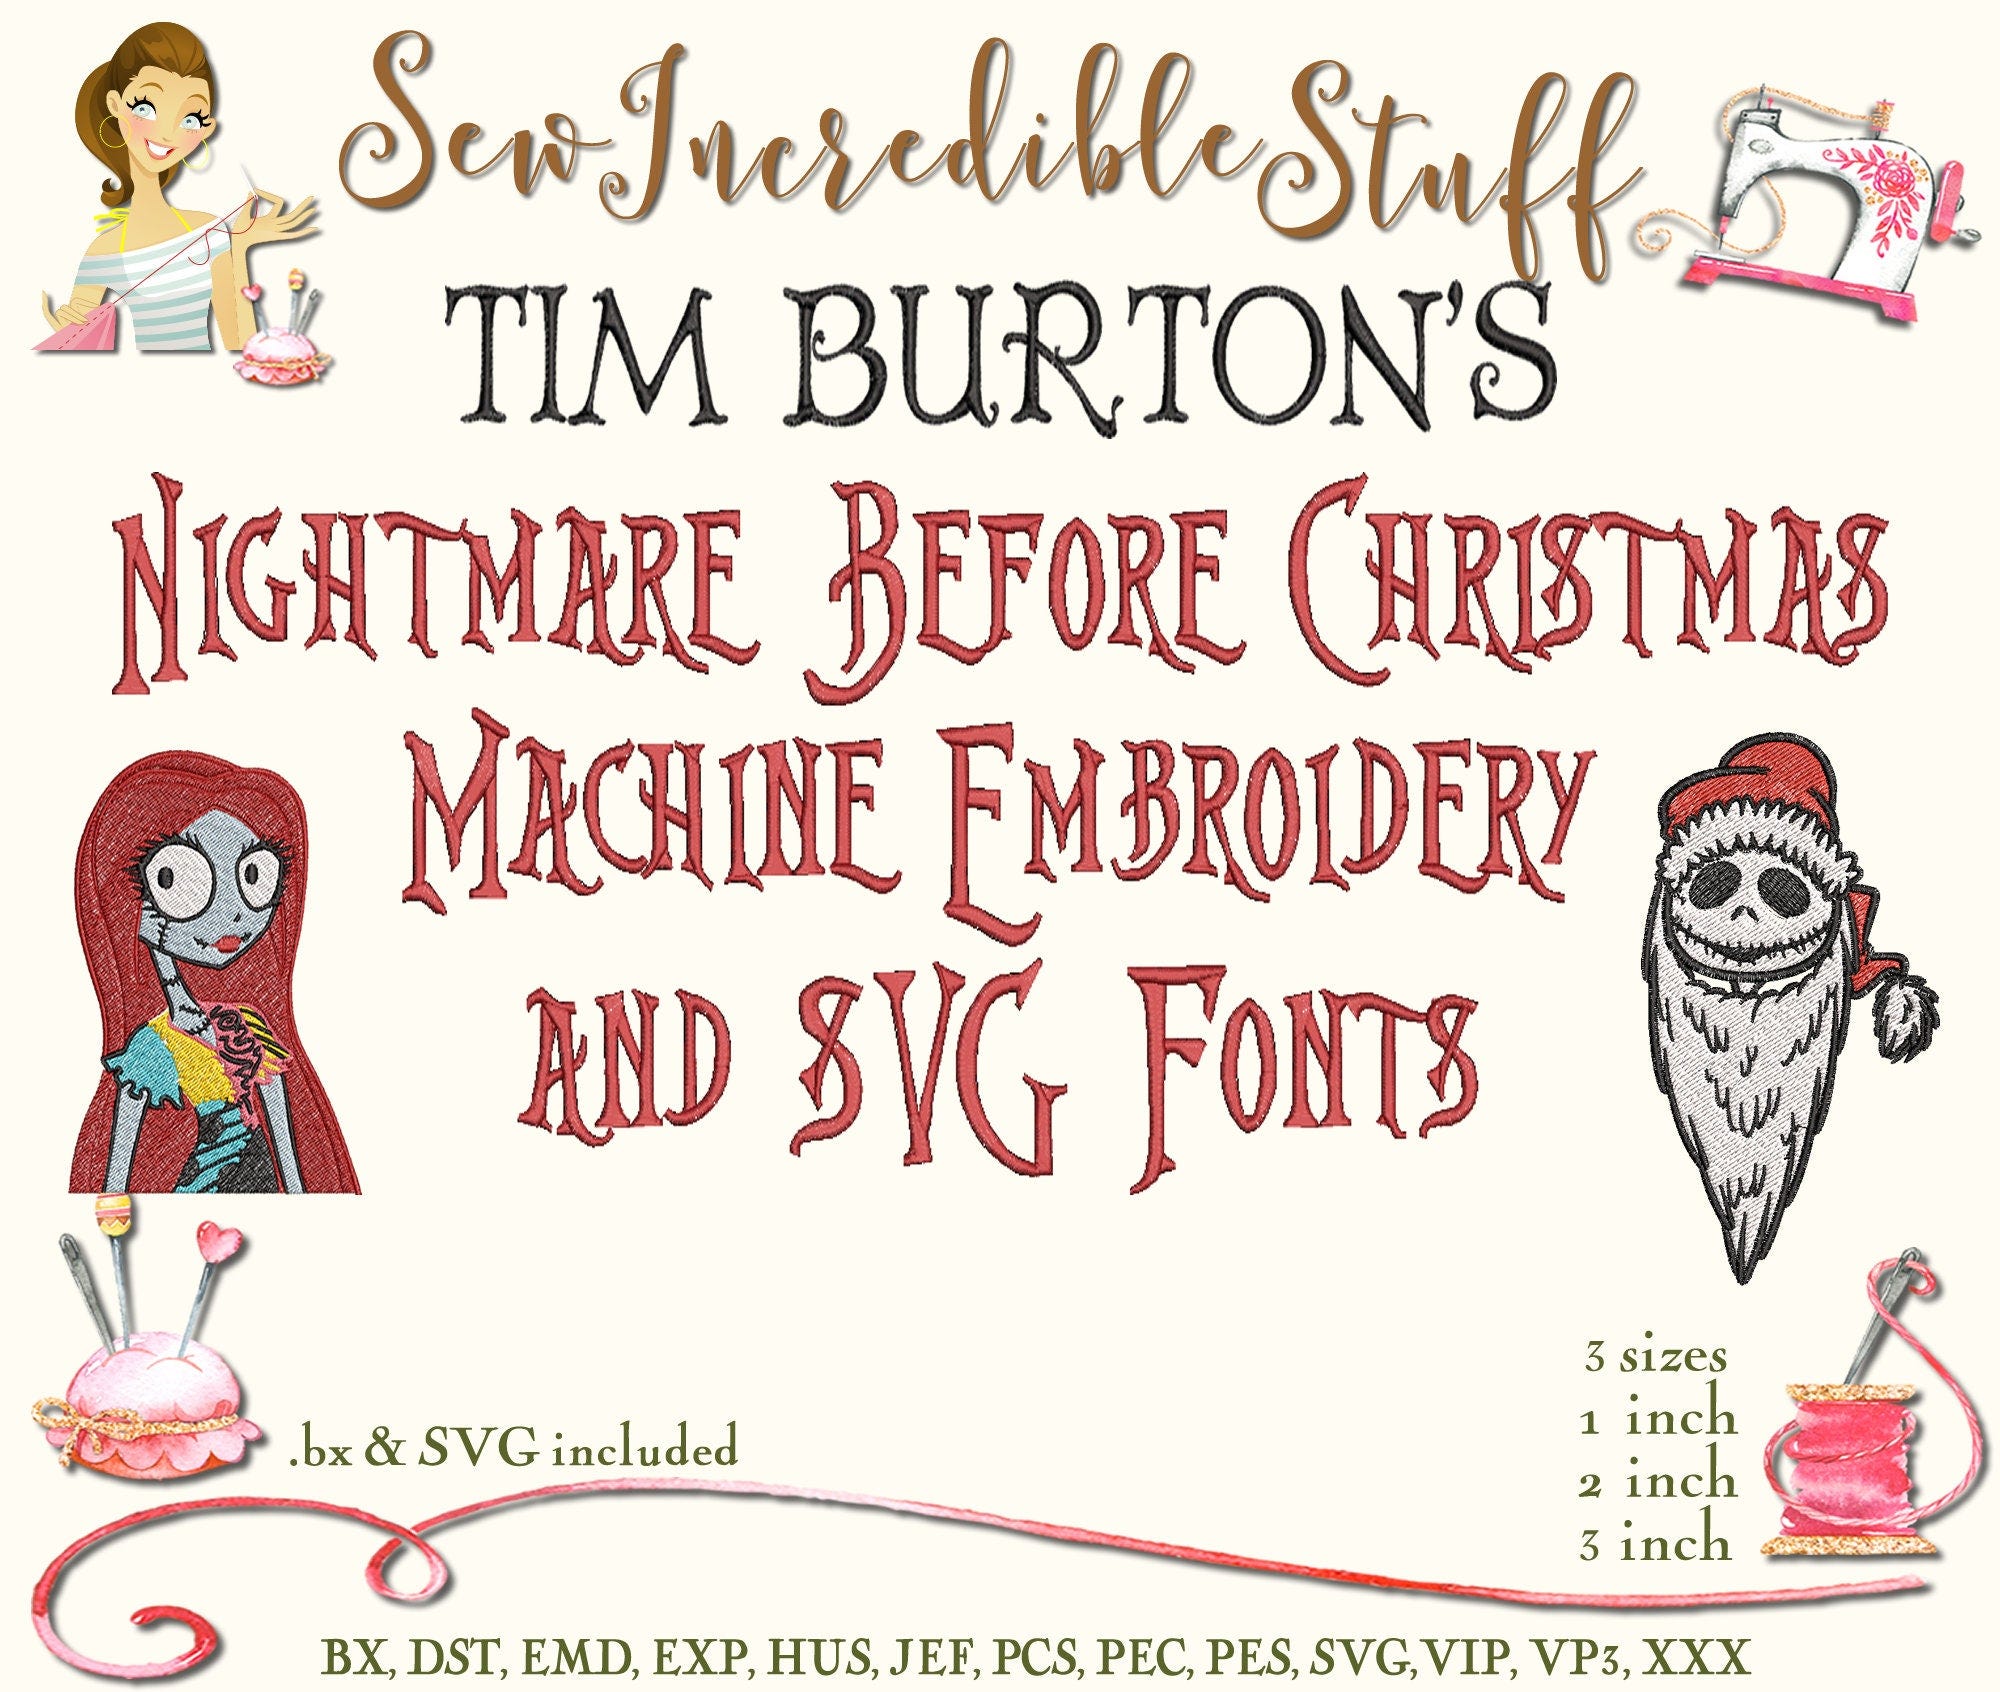 Nightmare Before Christmas Machine Embroidery & SVG Fonts and Graphics - SVG Fonts - BX Fonts - 11 embroidery formats